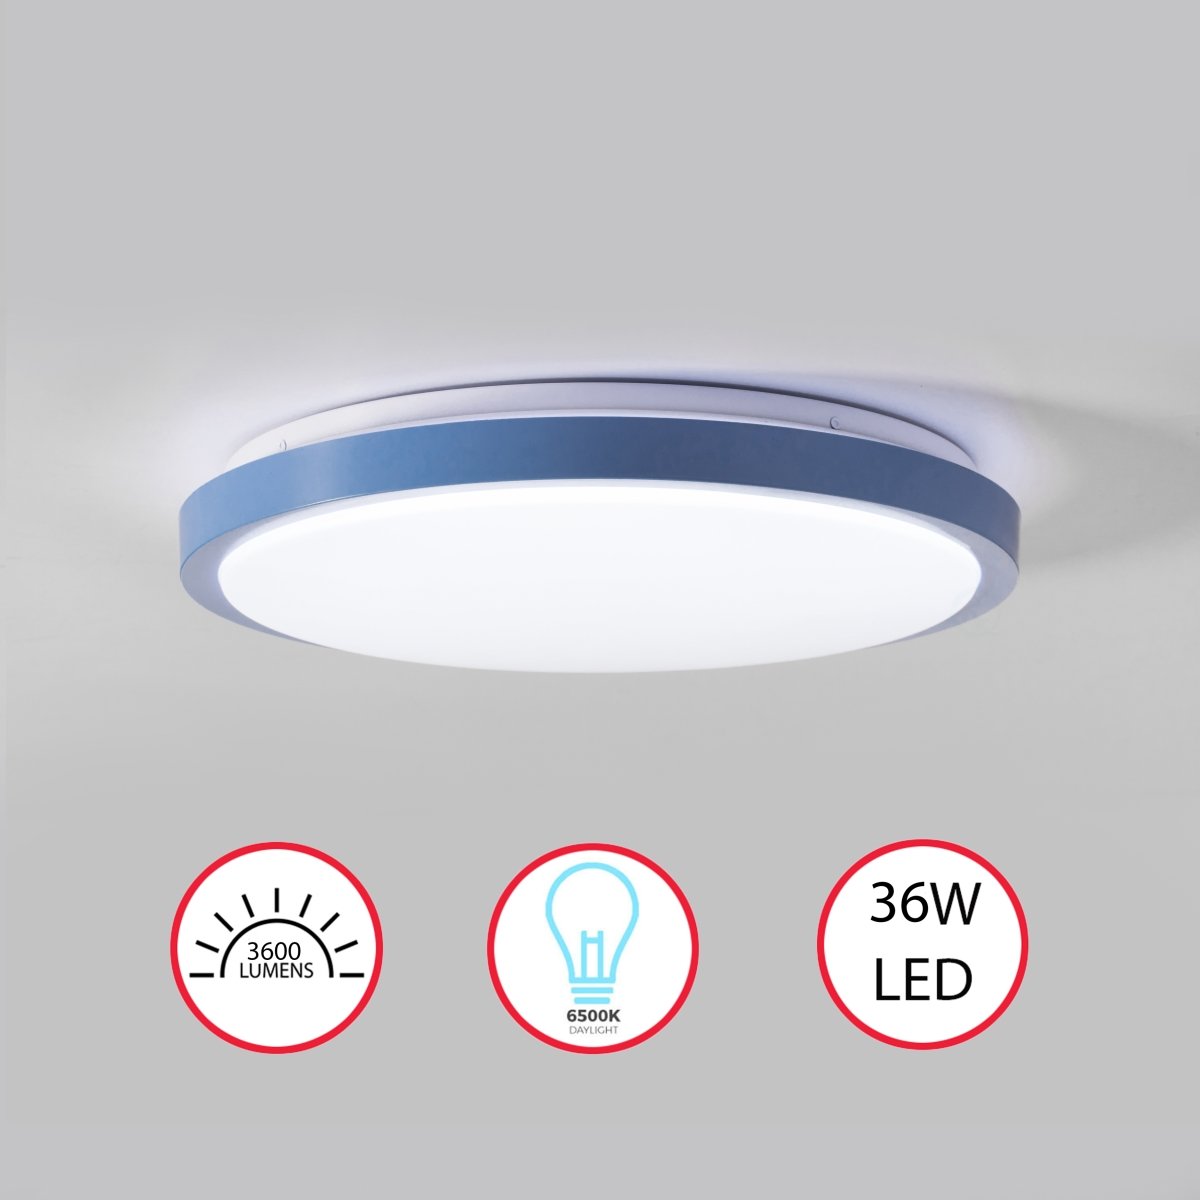 Picture of Quickway Imports QI004034.L.BL Round LED Ceiling Light Fixture Flush Mount Lighting, 6500K 30,000 Hour Lifetime 15 in. Blue 36W